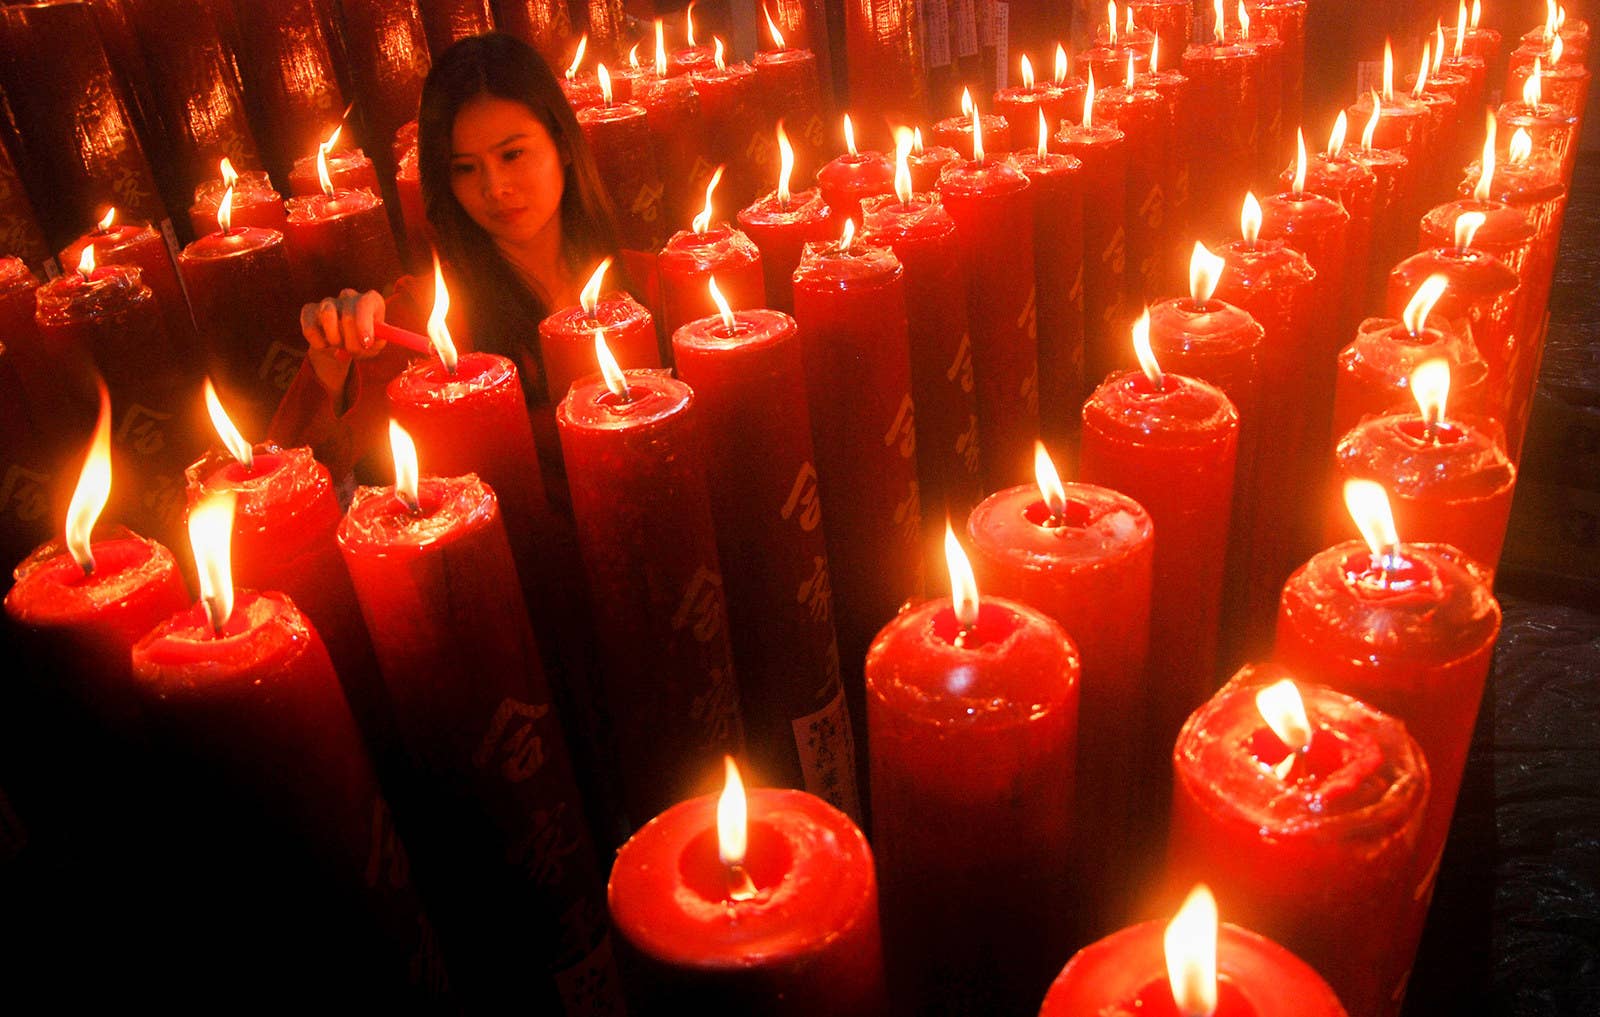 A woman lights a candle at a Chinese temple to mark the Lunar New Year in Bandung, West Java province, on Feb. 16.